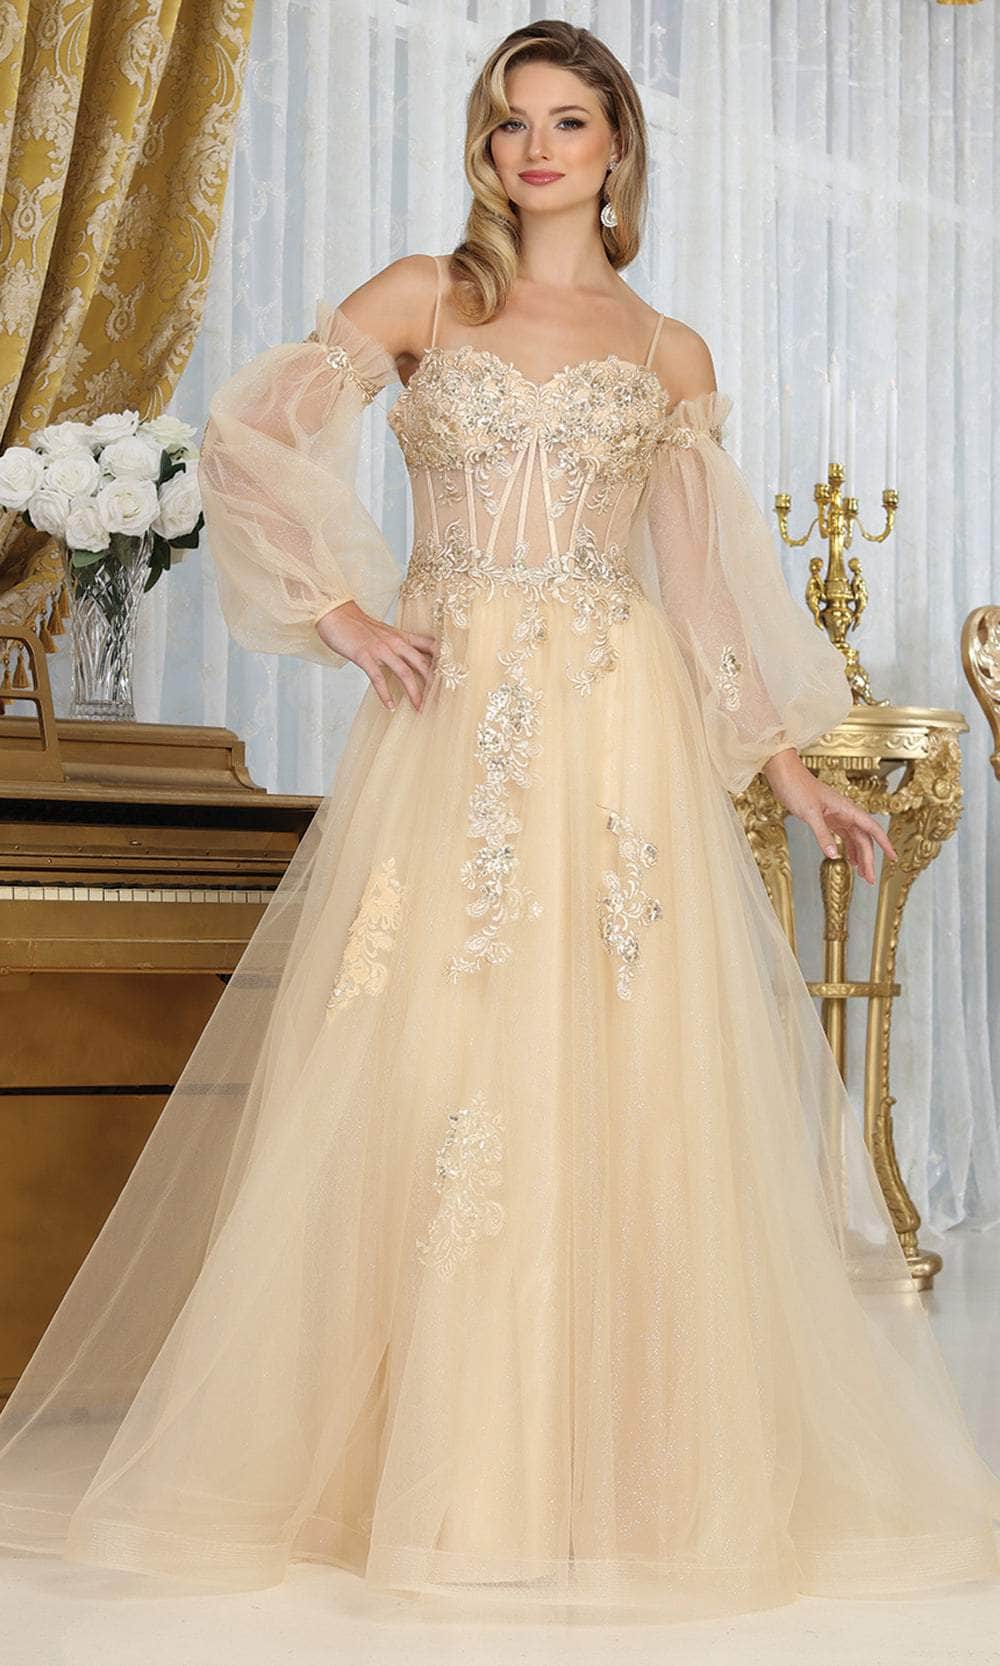 May Queen RQ8073 - Embellished A-Line Prom Gown Prom Dresses 4 / Champagne